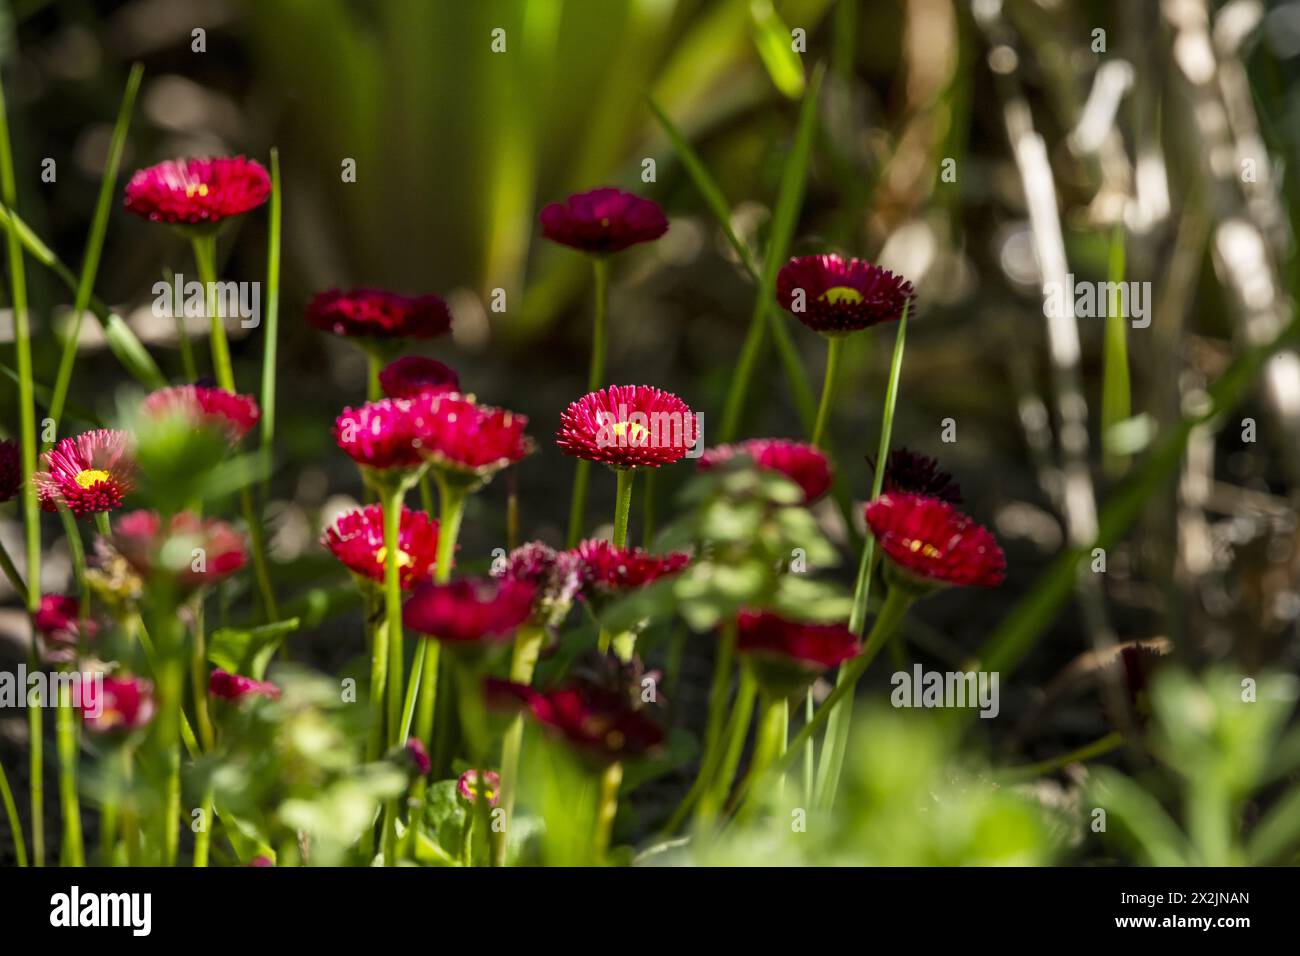 A bush of red daisies between lights and shadows protected by other taller plants Stock Photo